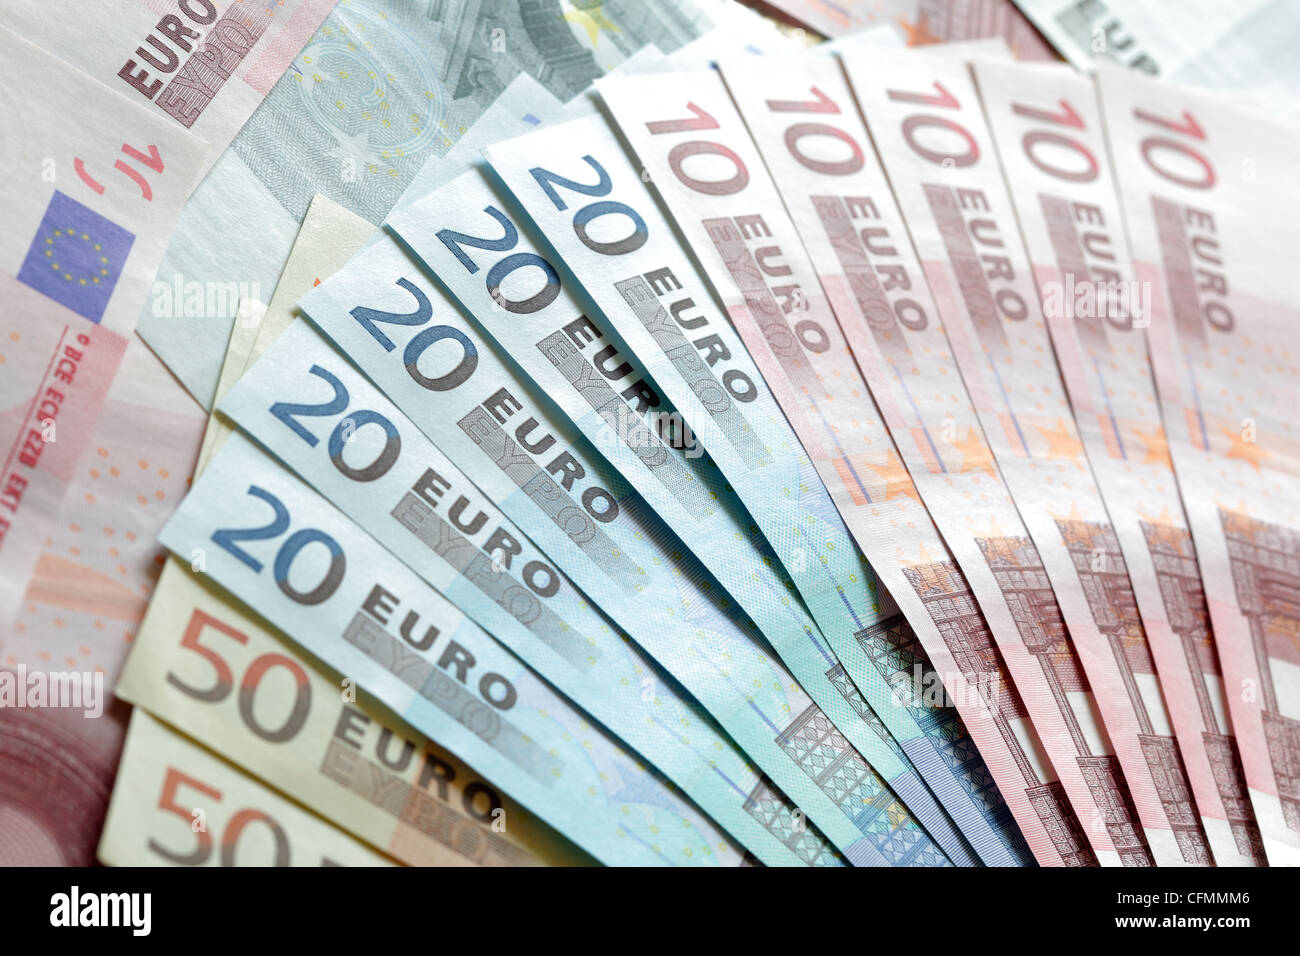 European currency Stock Photo